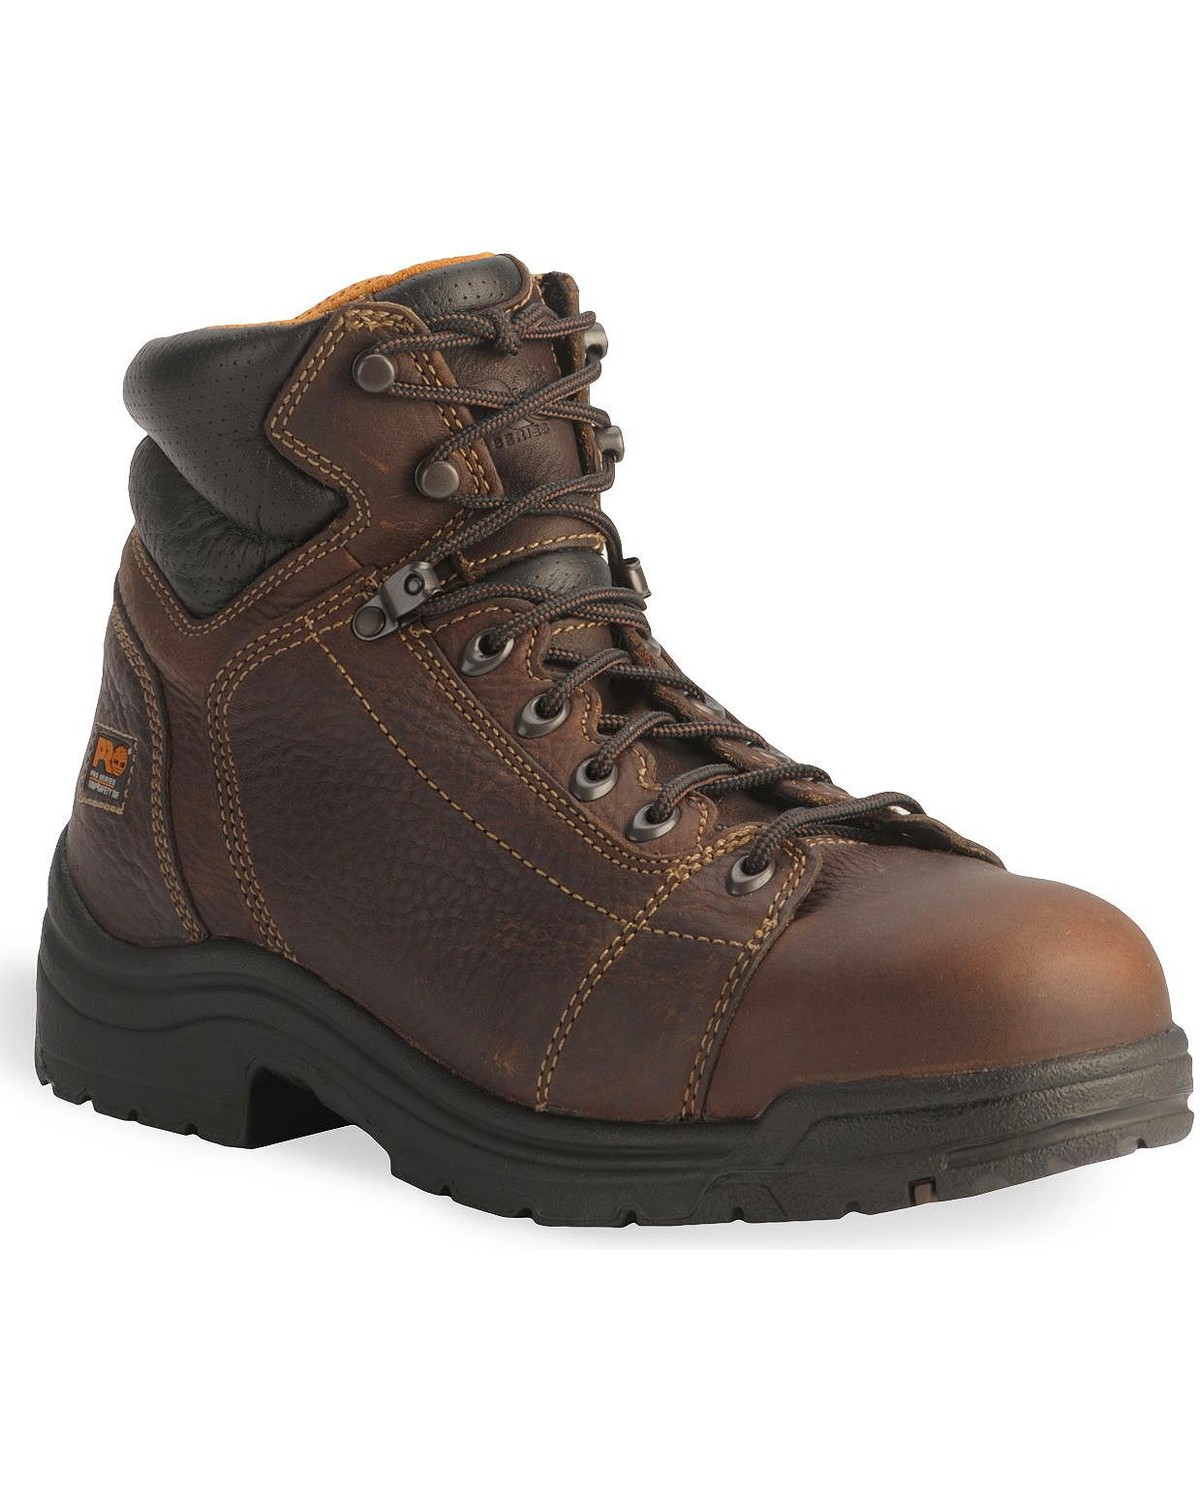 Timberland Pro TiTAN 6" Lace-Up Boots - Composite Toe